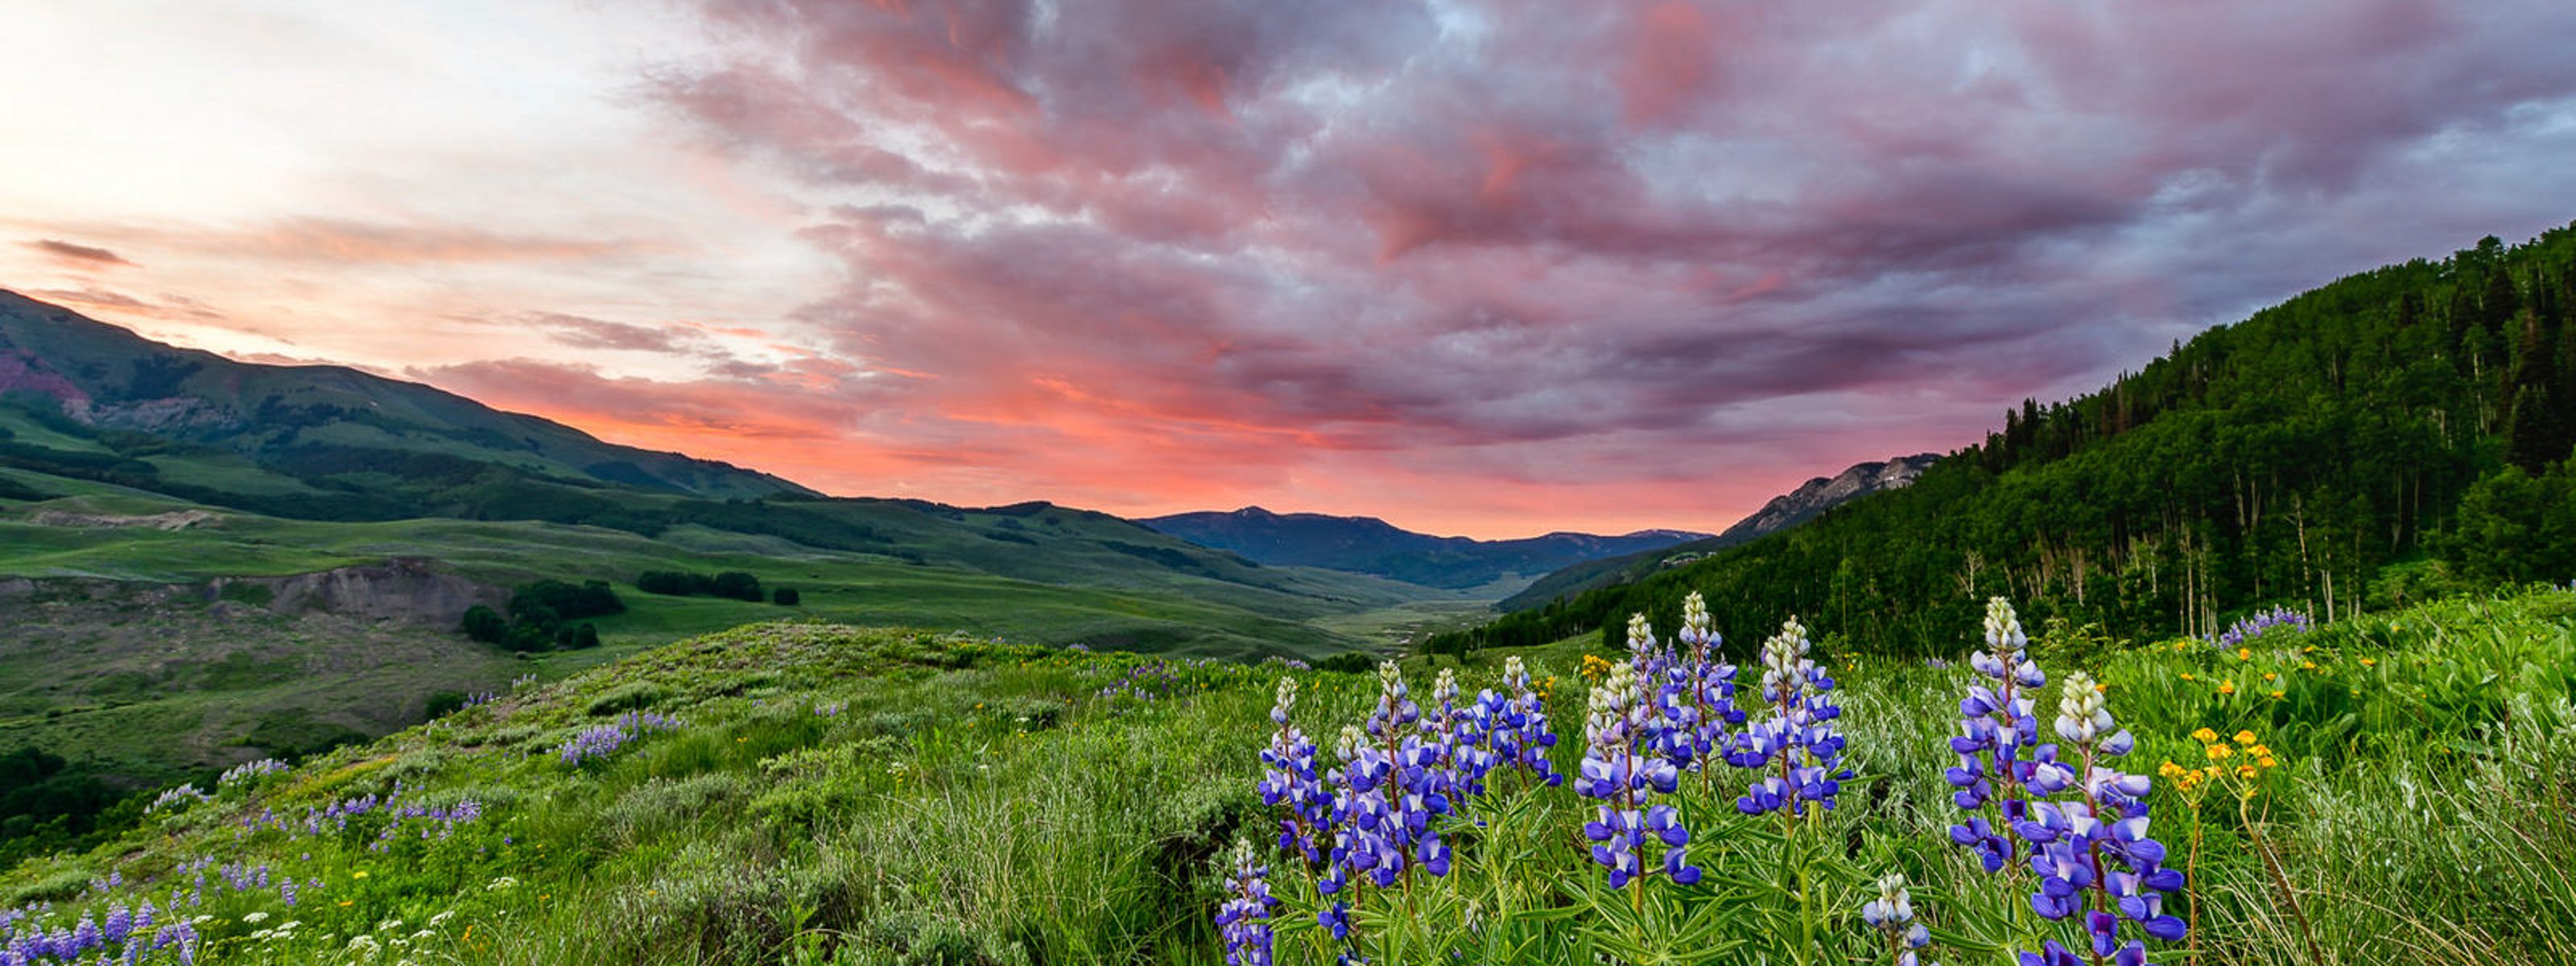 Wildflowers in grass with mountains in the background at sunset.